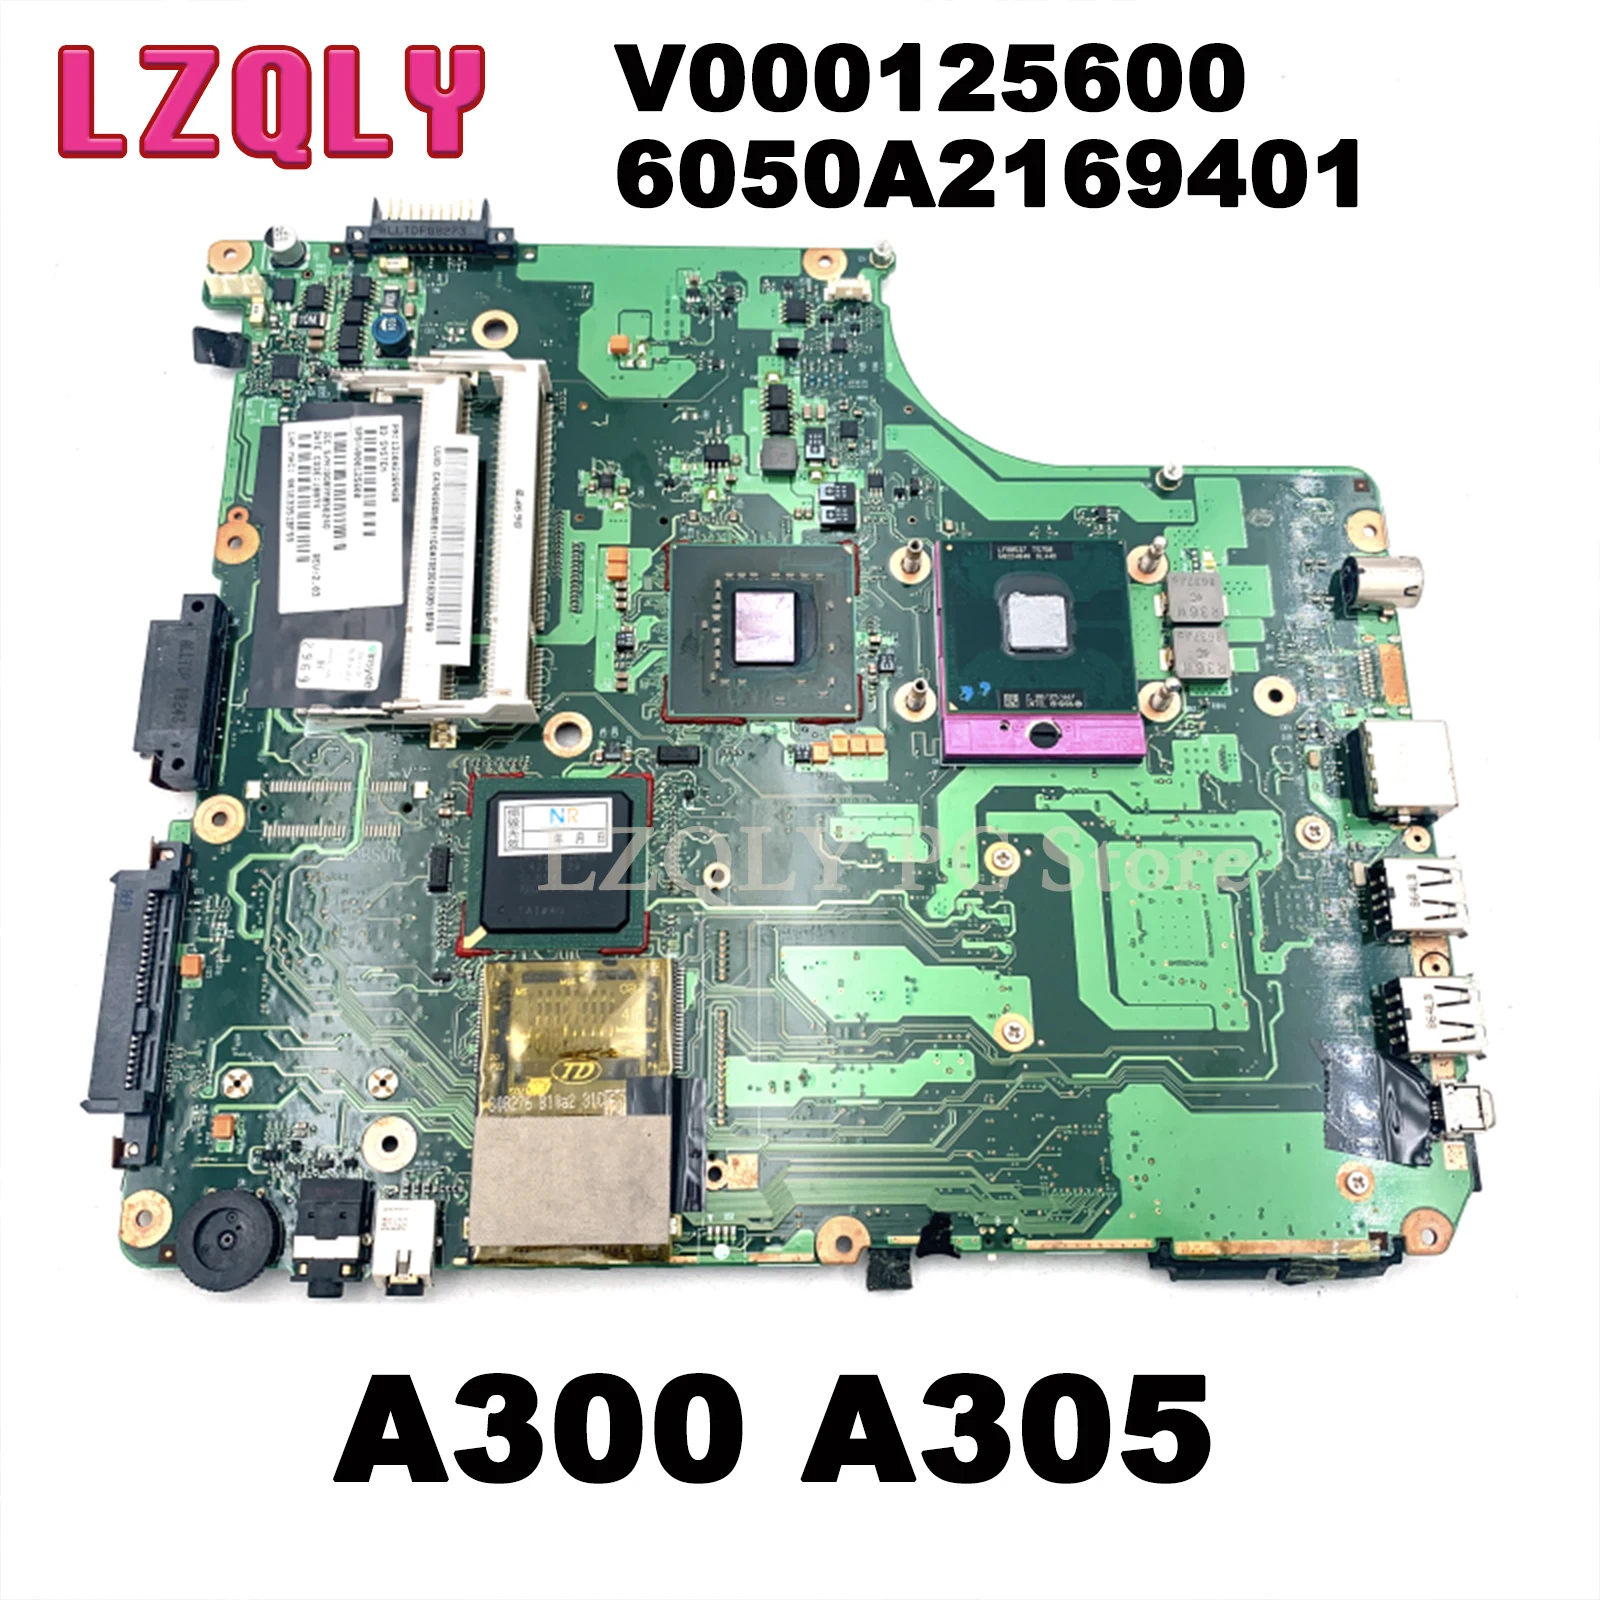 LZQLY V000125600 6050A2169401 Laptop Motherboard For Toshiba Satellite A300 A305 MAIN BOARD DDR2 Free CPU